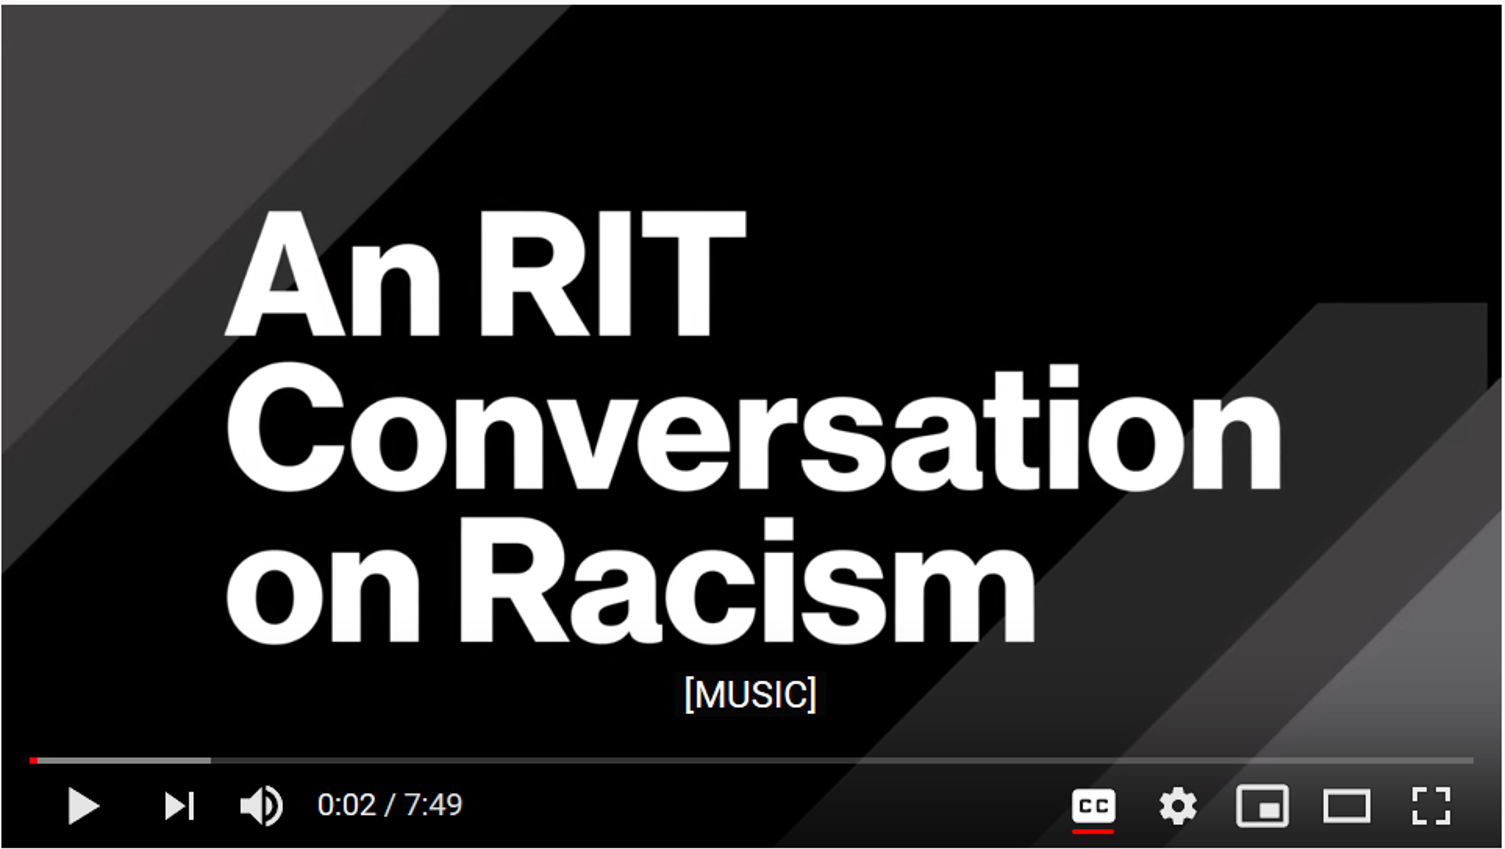 RIT and racism